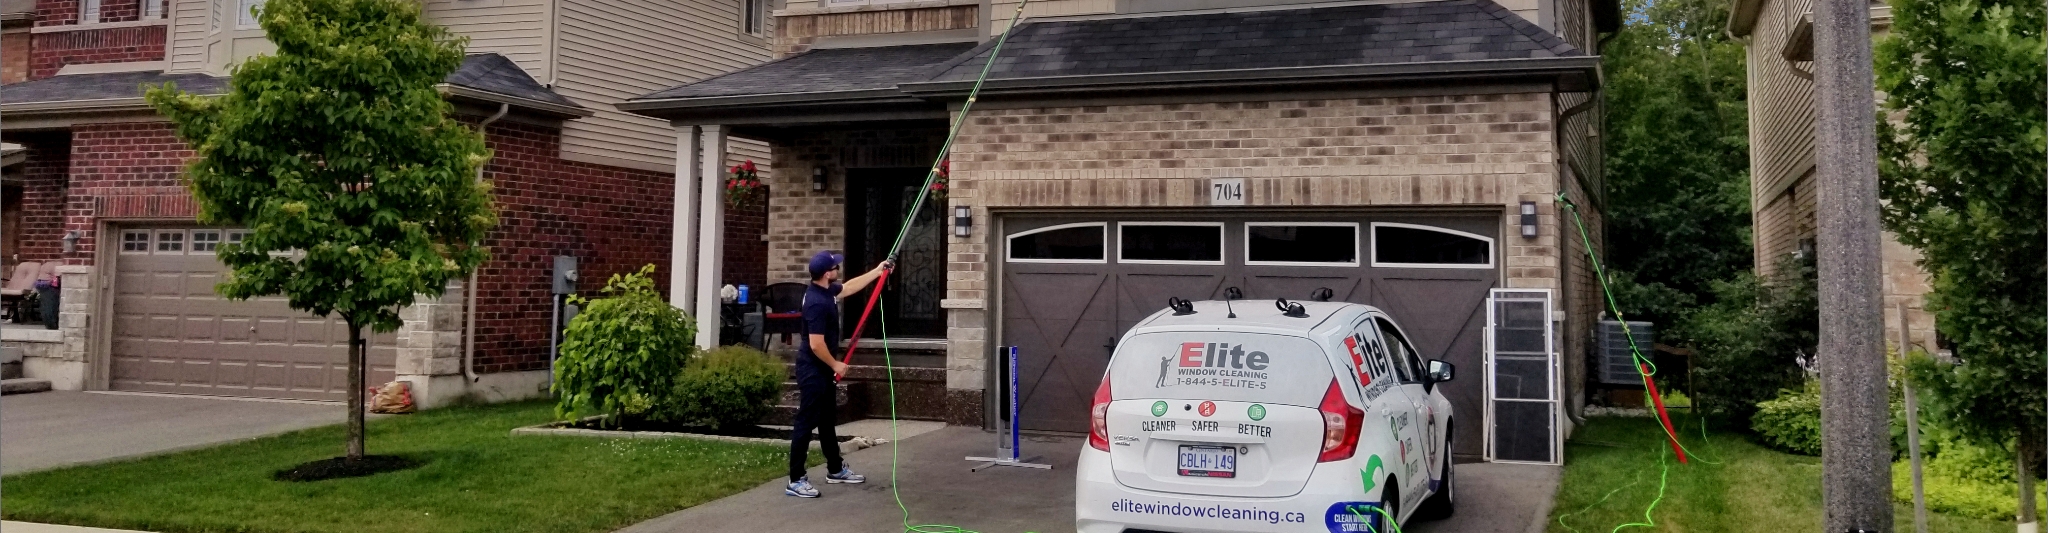 Employee performing window Cleaning in vancouver